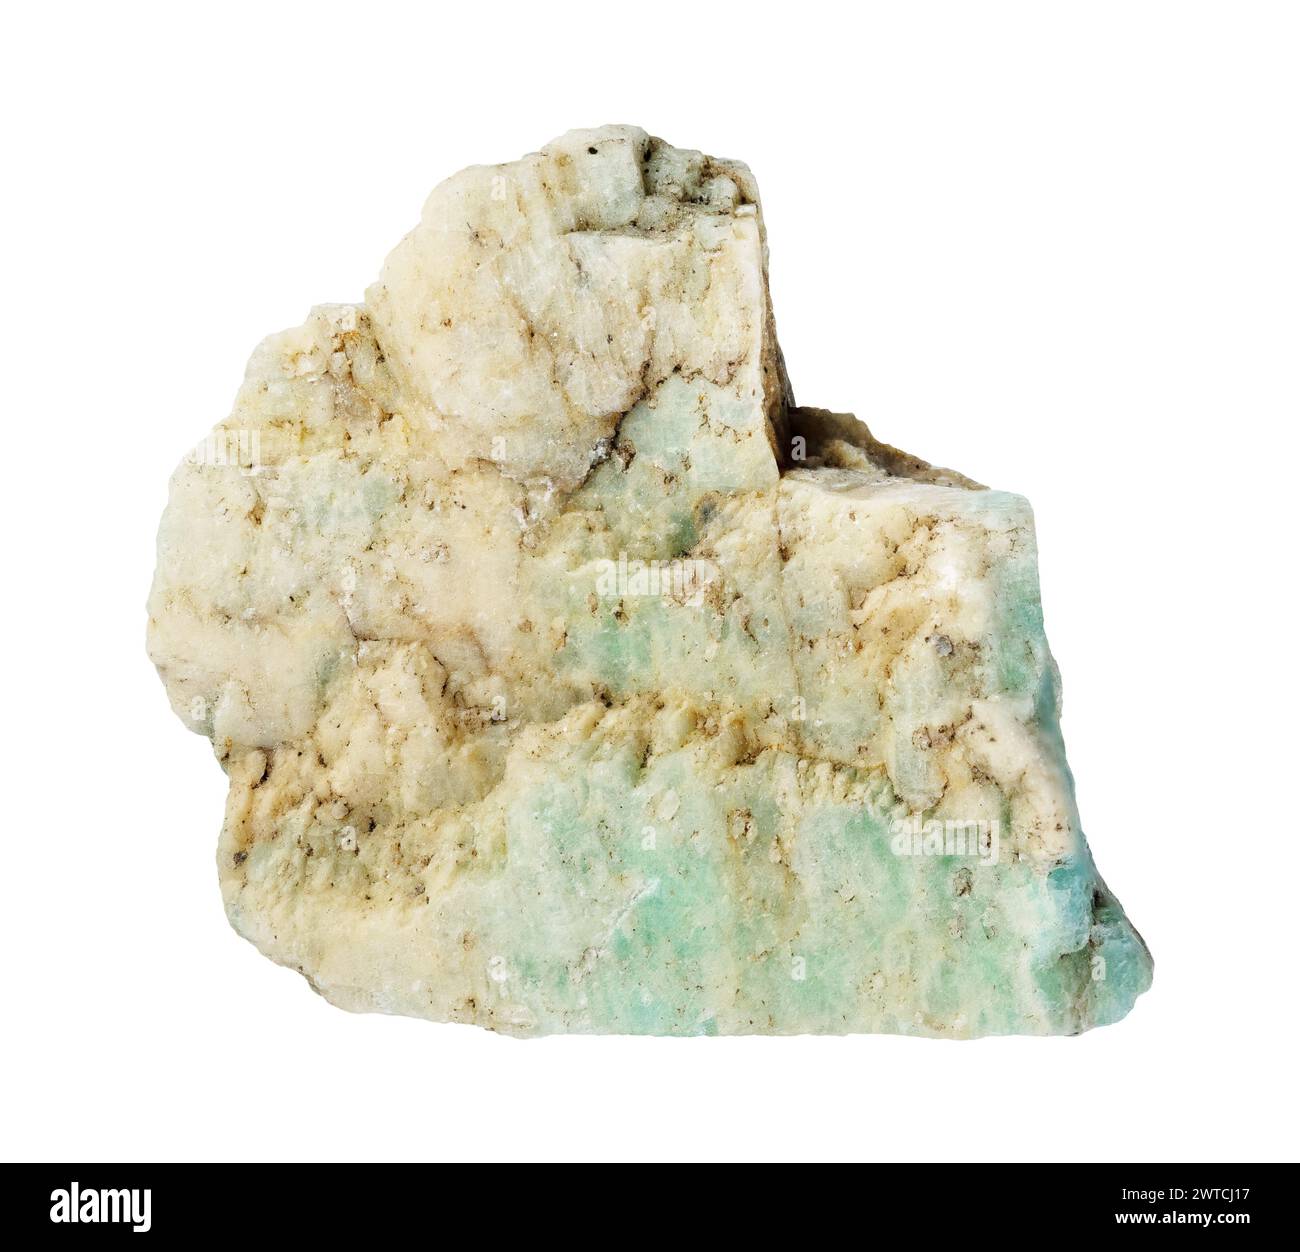 specimen of natural raw amazonite mineral cutout on white background Stock Photo